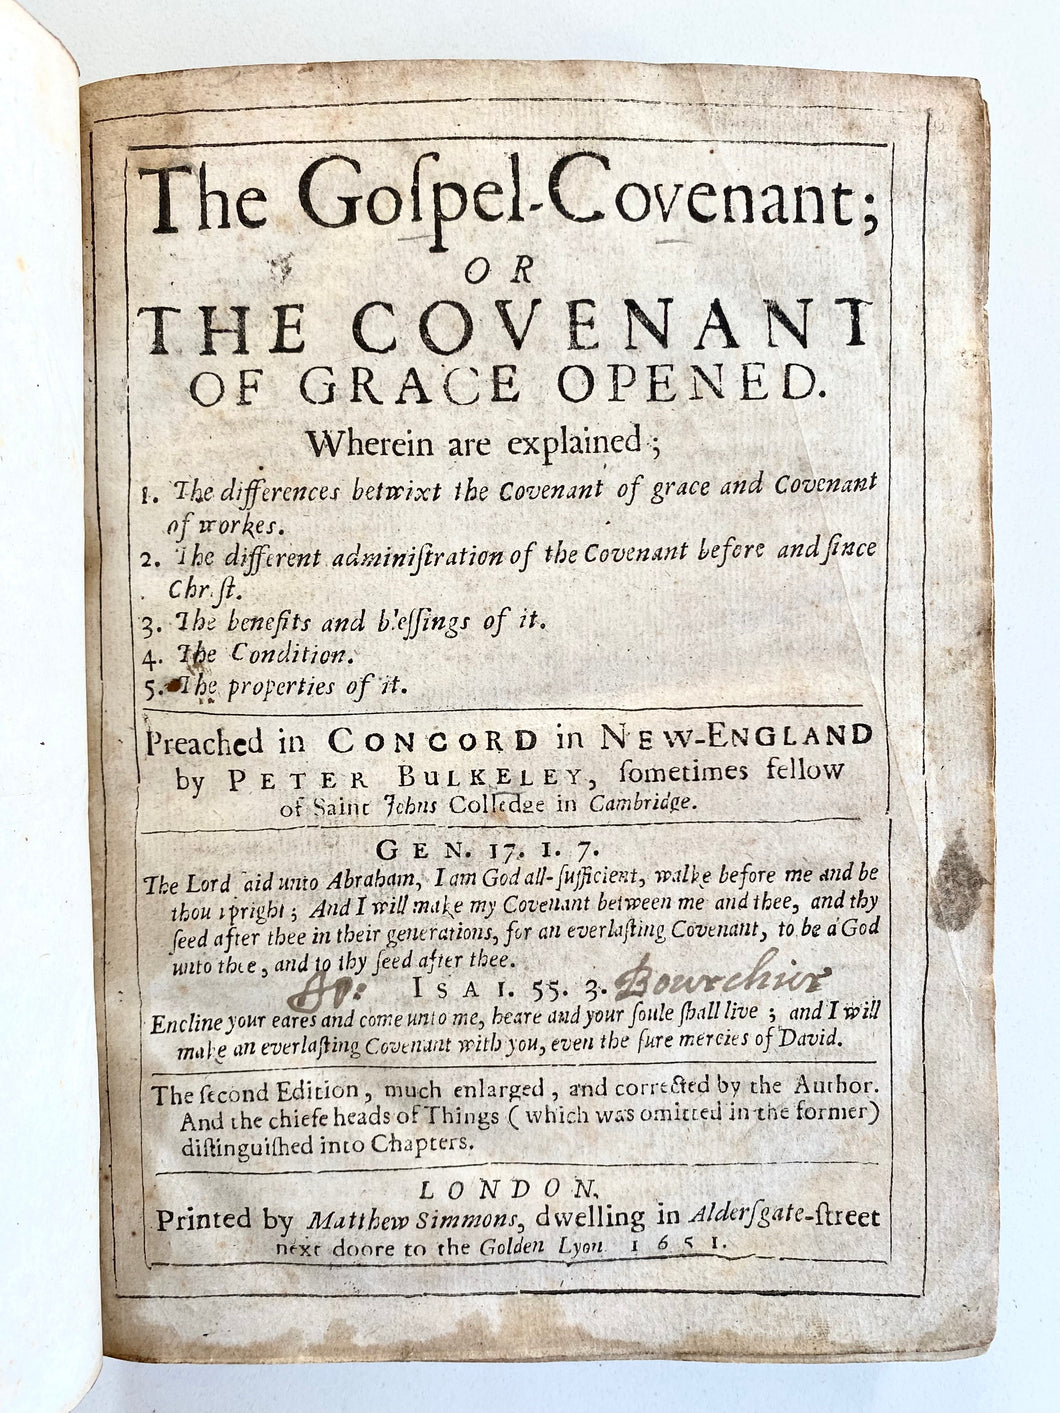 1651 PETER BULKELEY. Rare American Puritan on the Covenant of Grace - Author of Bay Psalm Book!